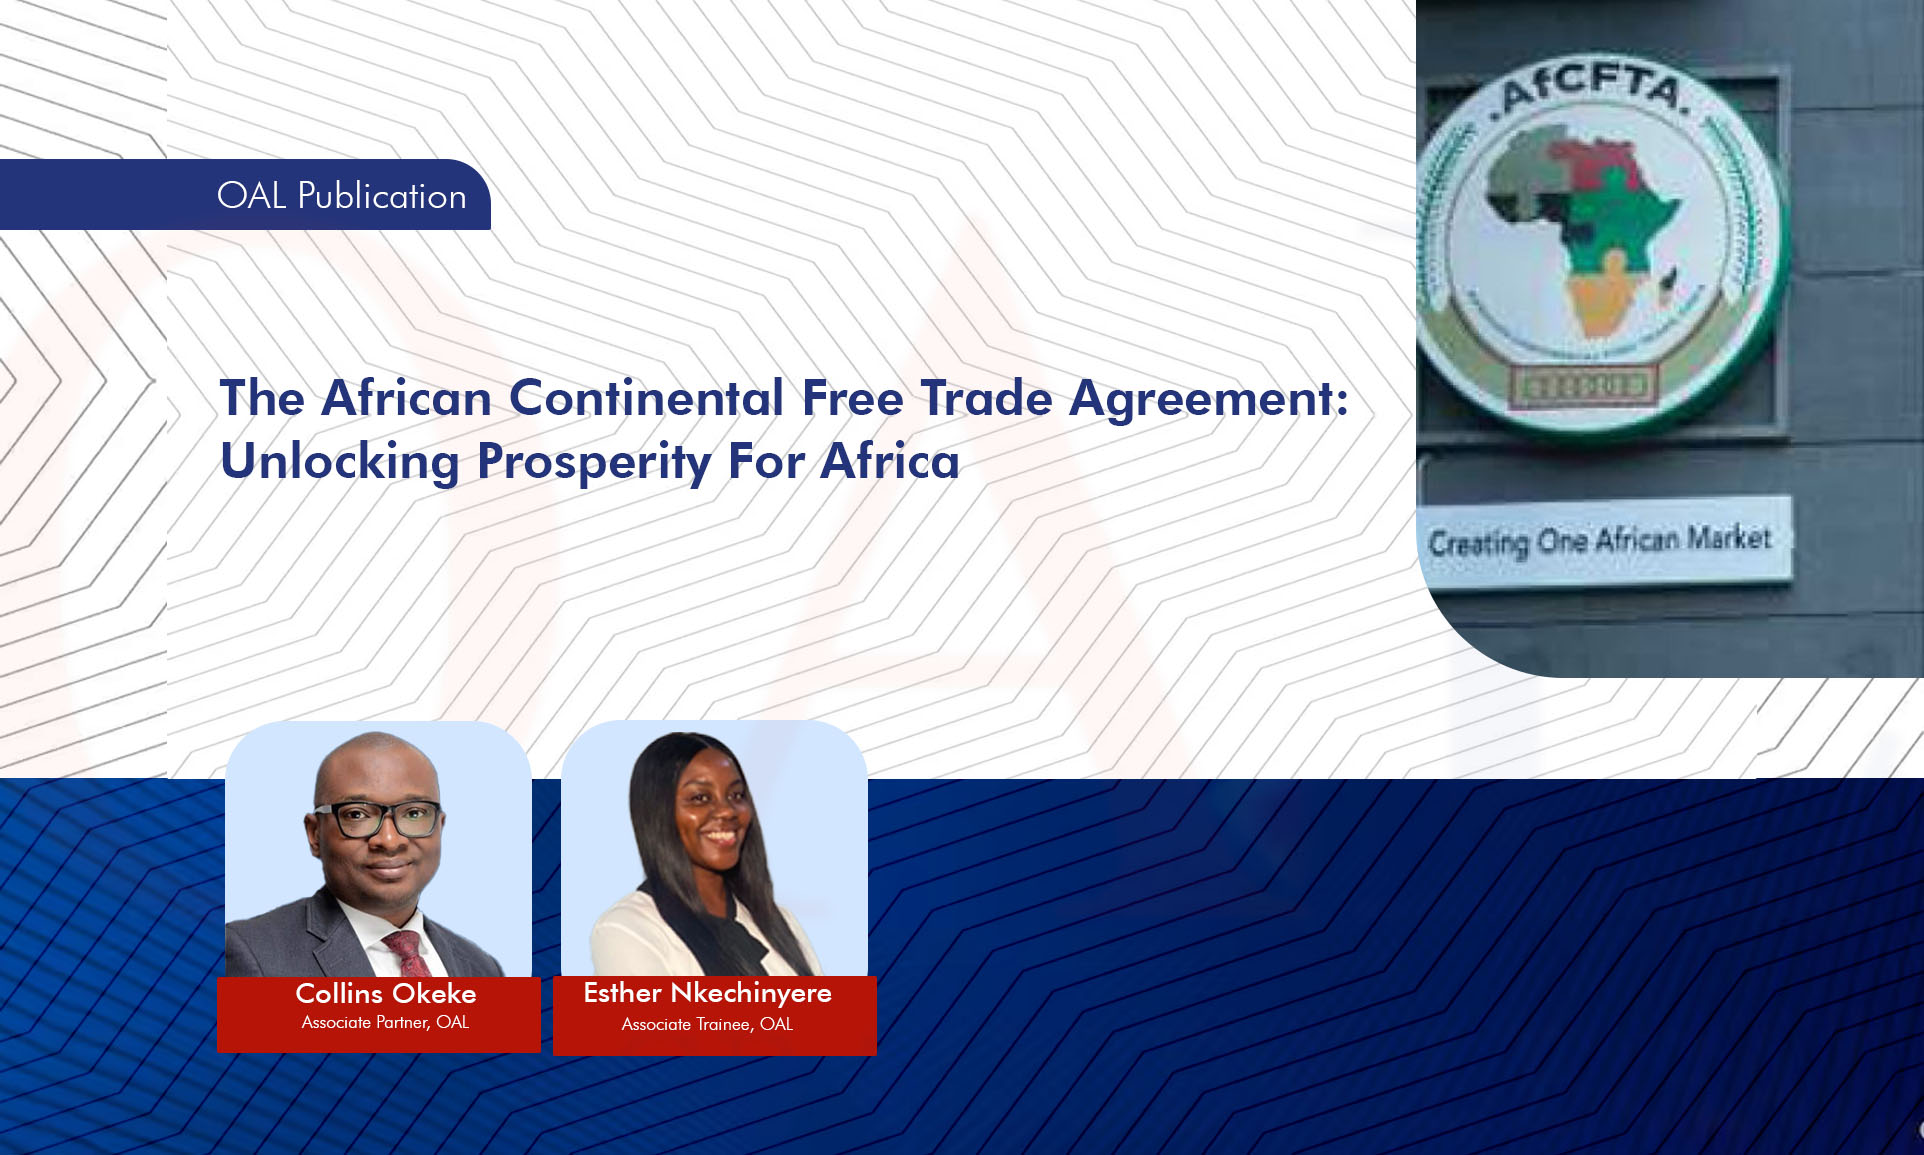 The African Continental Free Trade Agreement: Unlocking Prosperity For Africa.